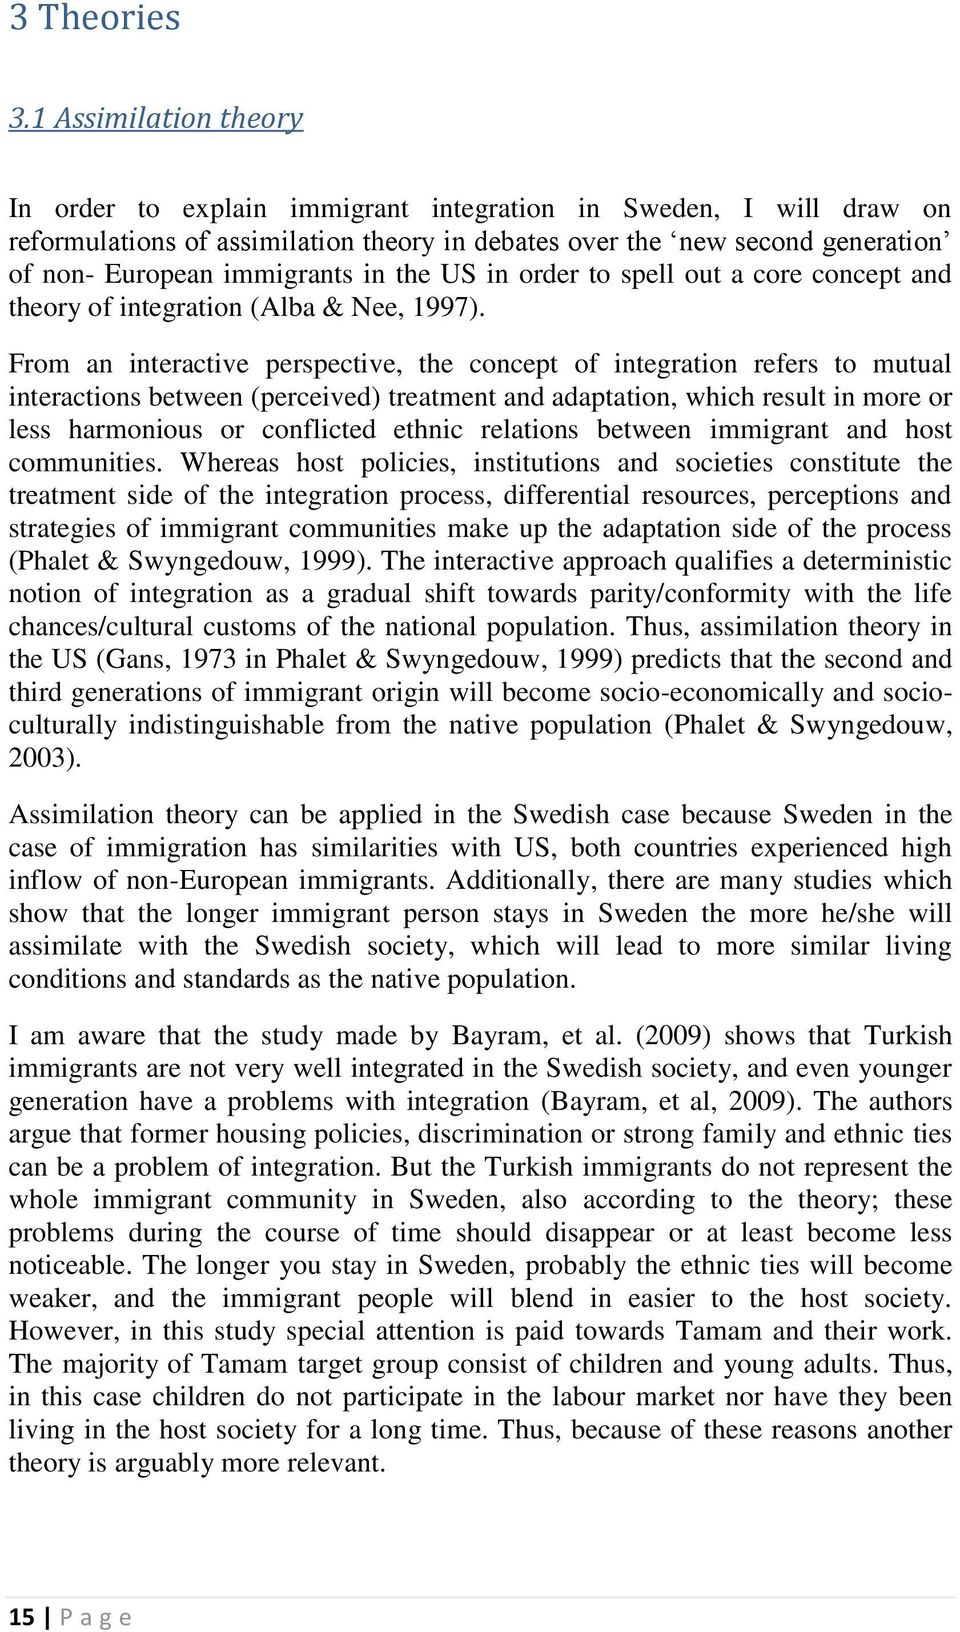 in the US in order to spell out a core concept and theory of integration (Alba & Nee, 1997).